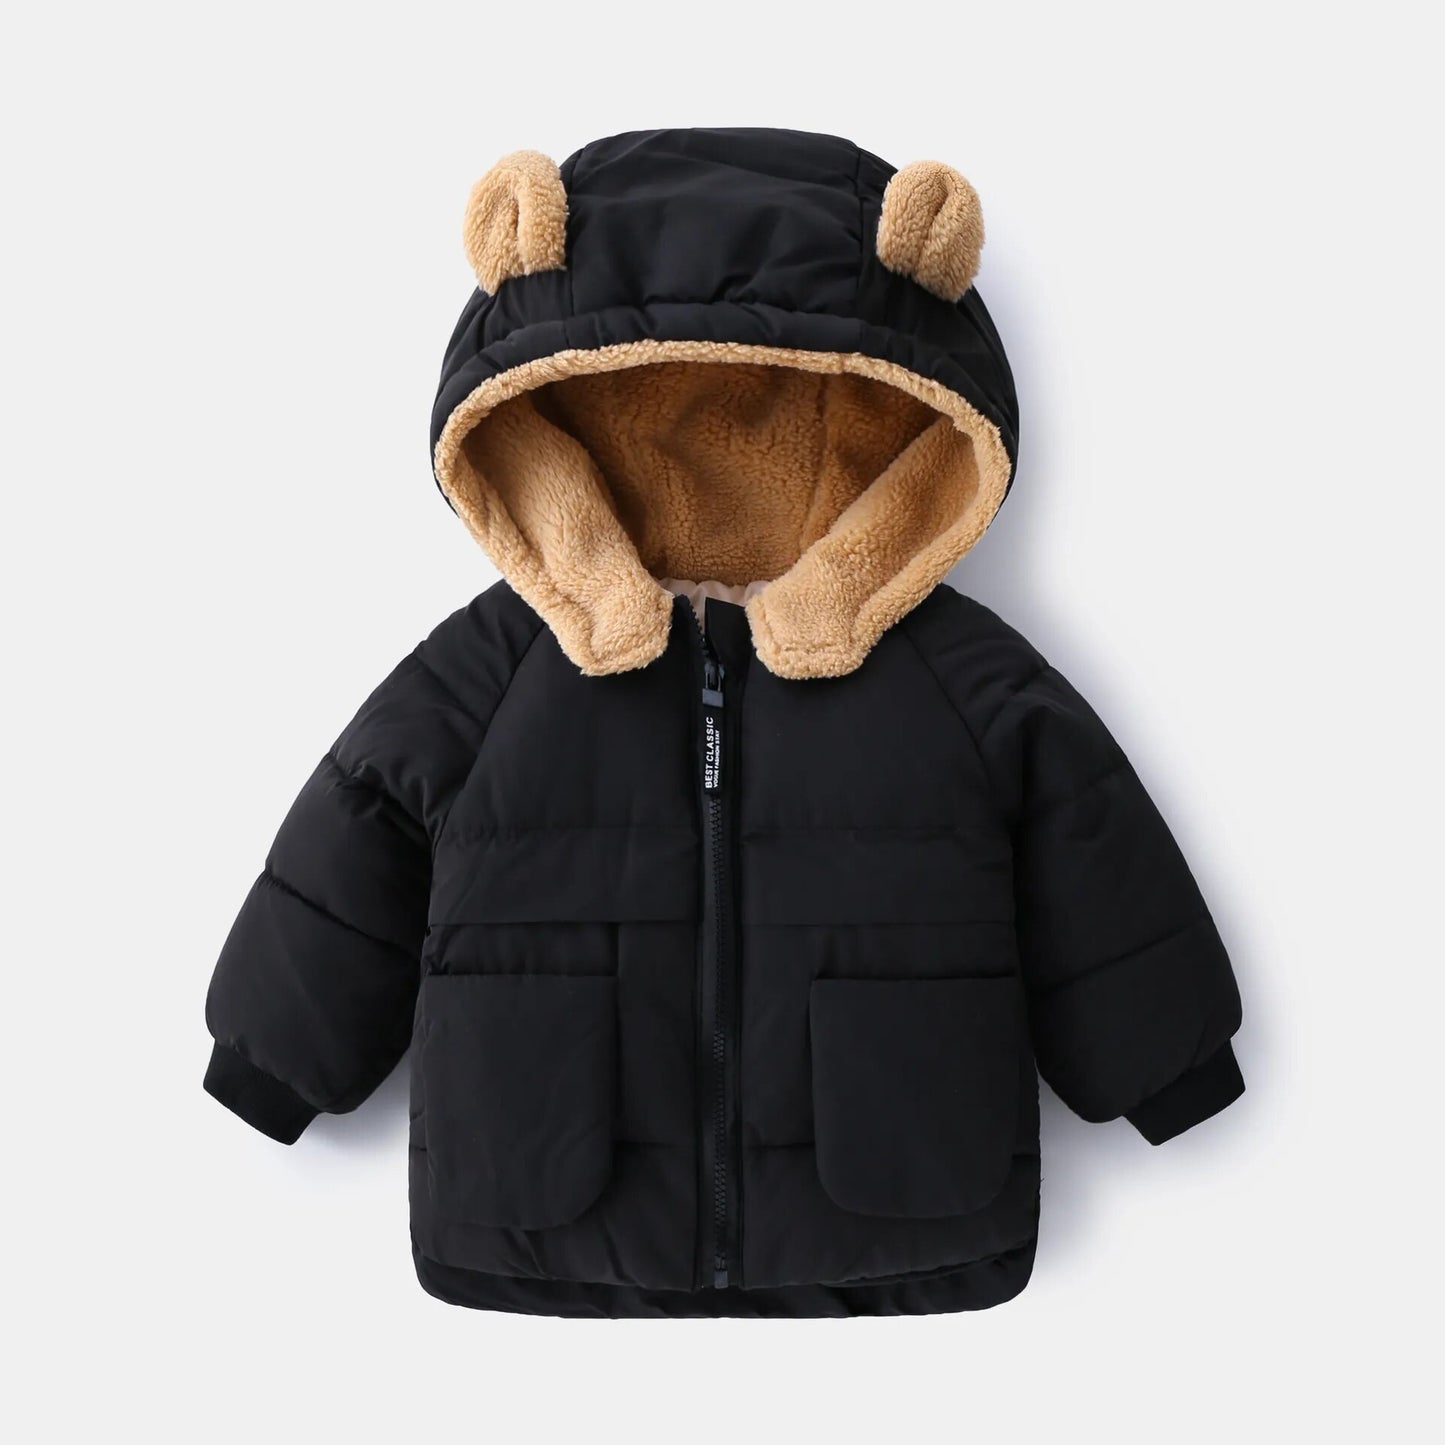 Bear Ear Toddler Coat-Black/  Free Hat Set with this item